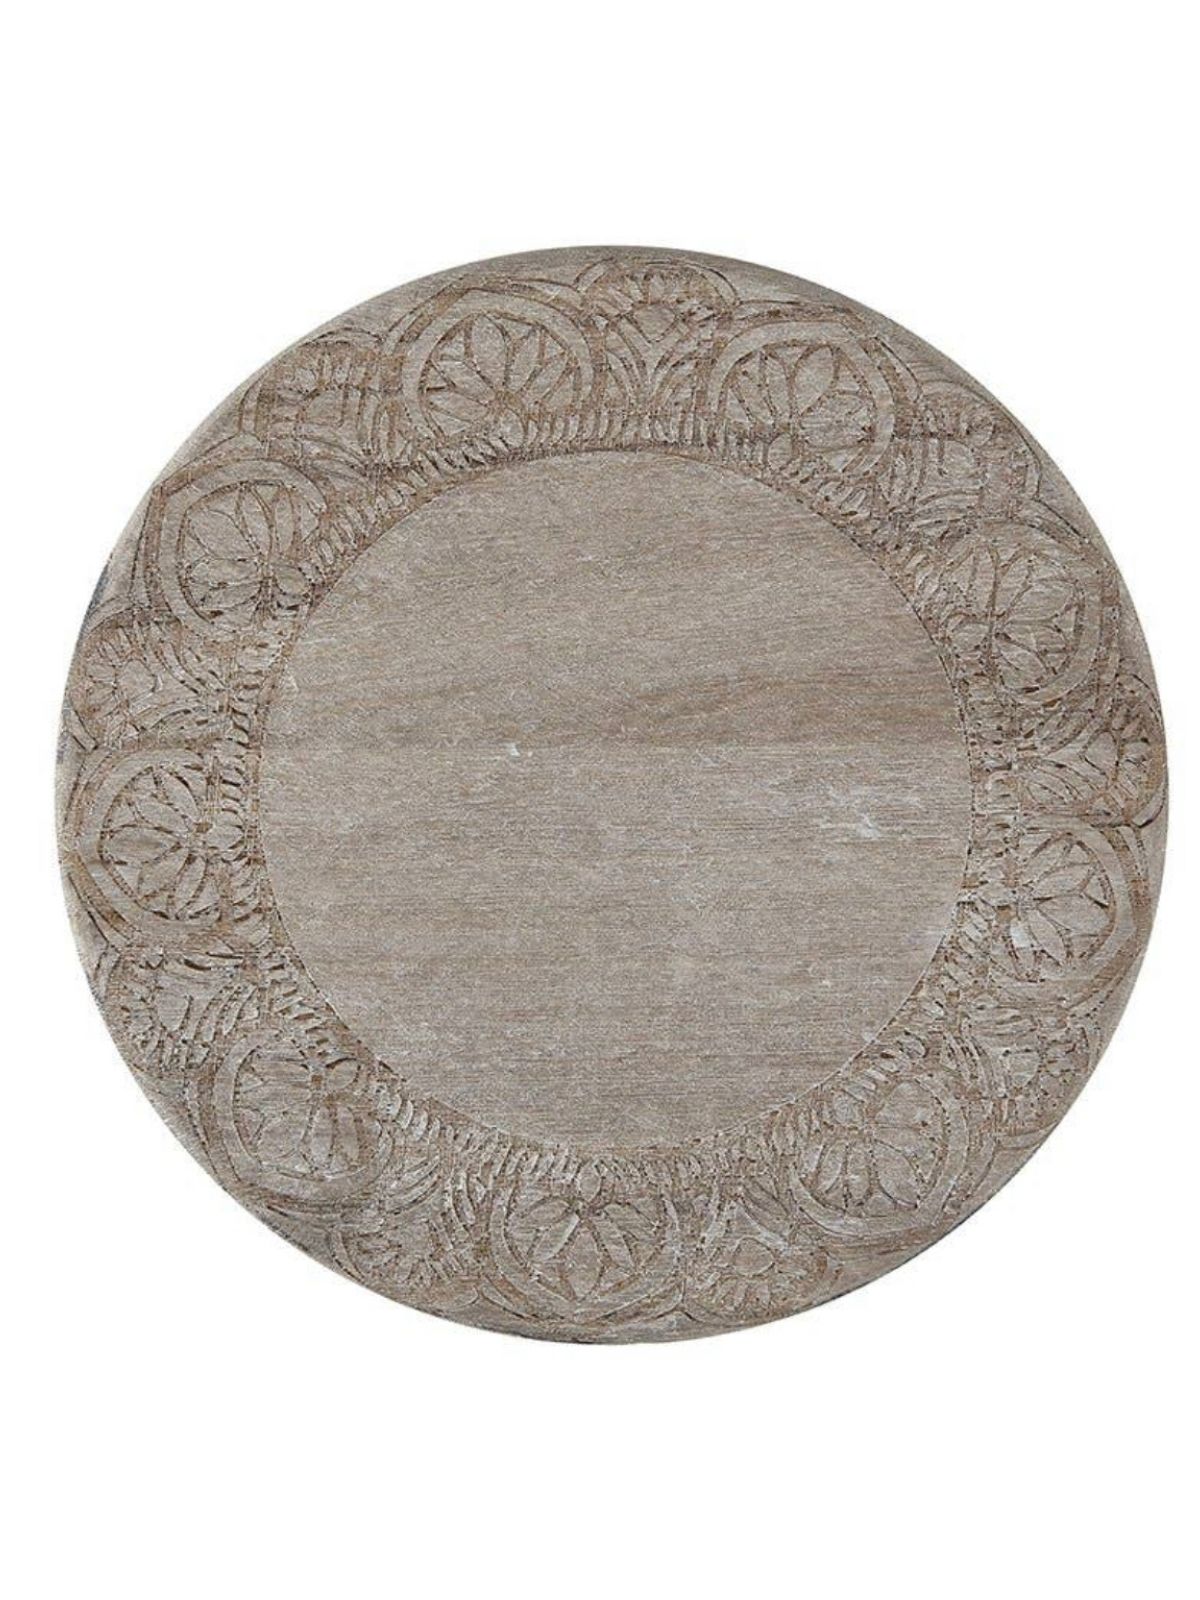 This beautiful riser adds an elegant charm to your decor. Perfect for style while showing its decorative flair. Made from paulownia wood and with a unique etched design.